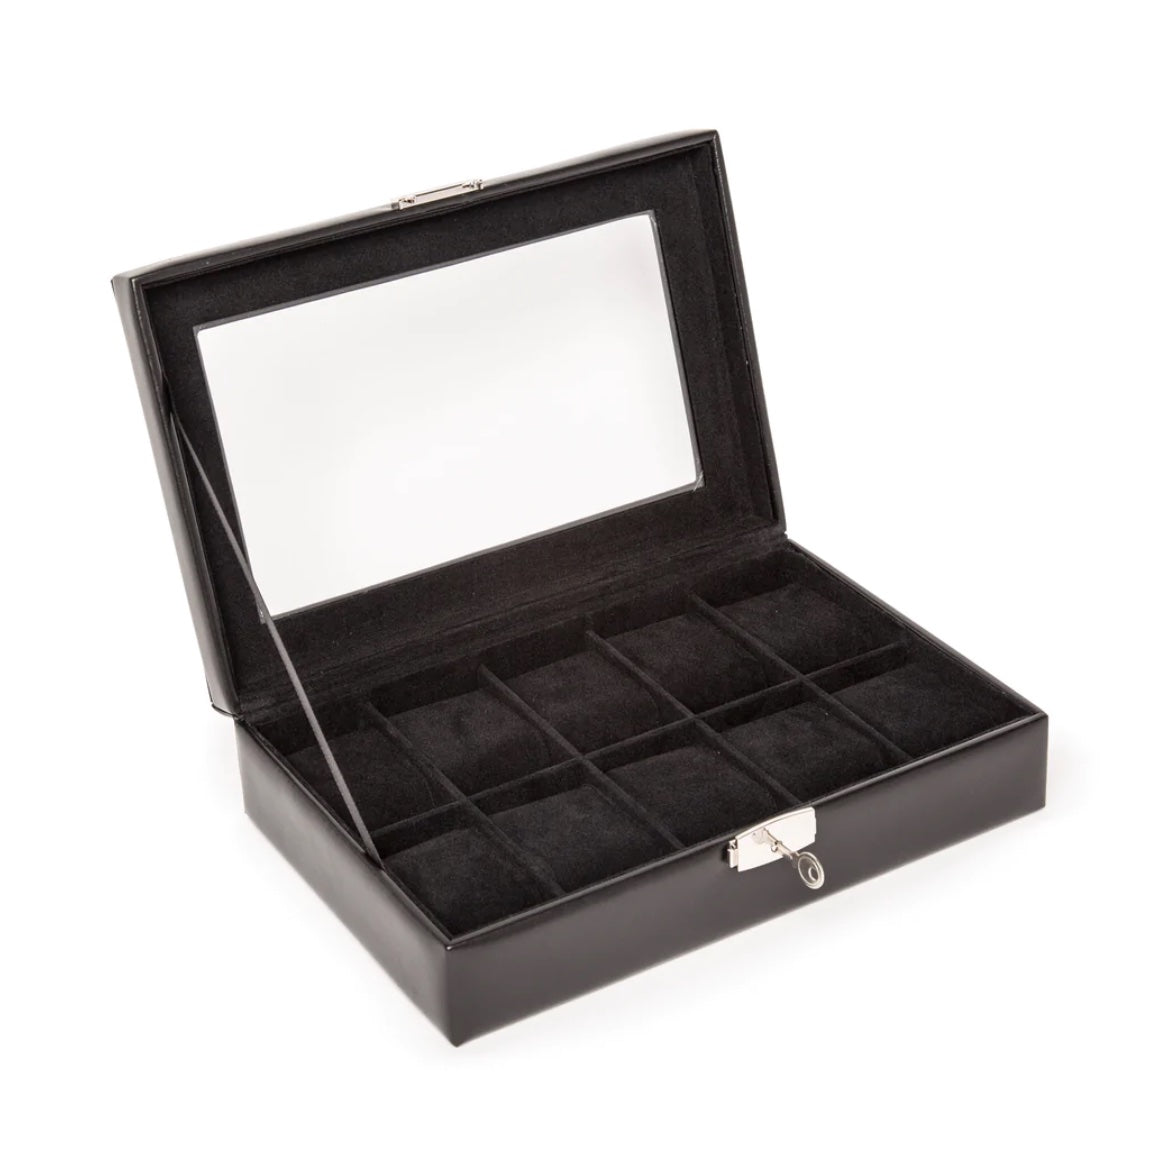 VEGAN LEATHER & WOOD WATCH BOX 10-SLOT WITH GLASS LID AND LOCK